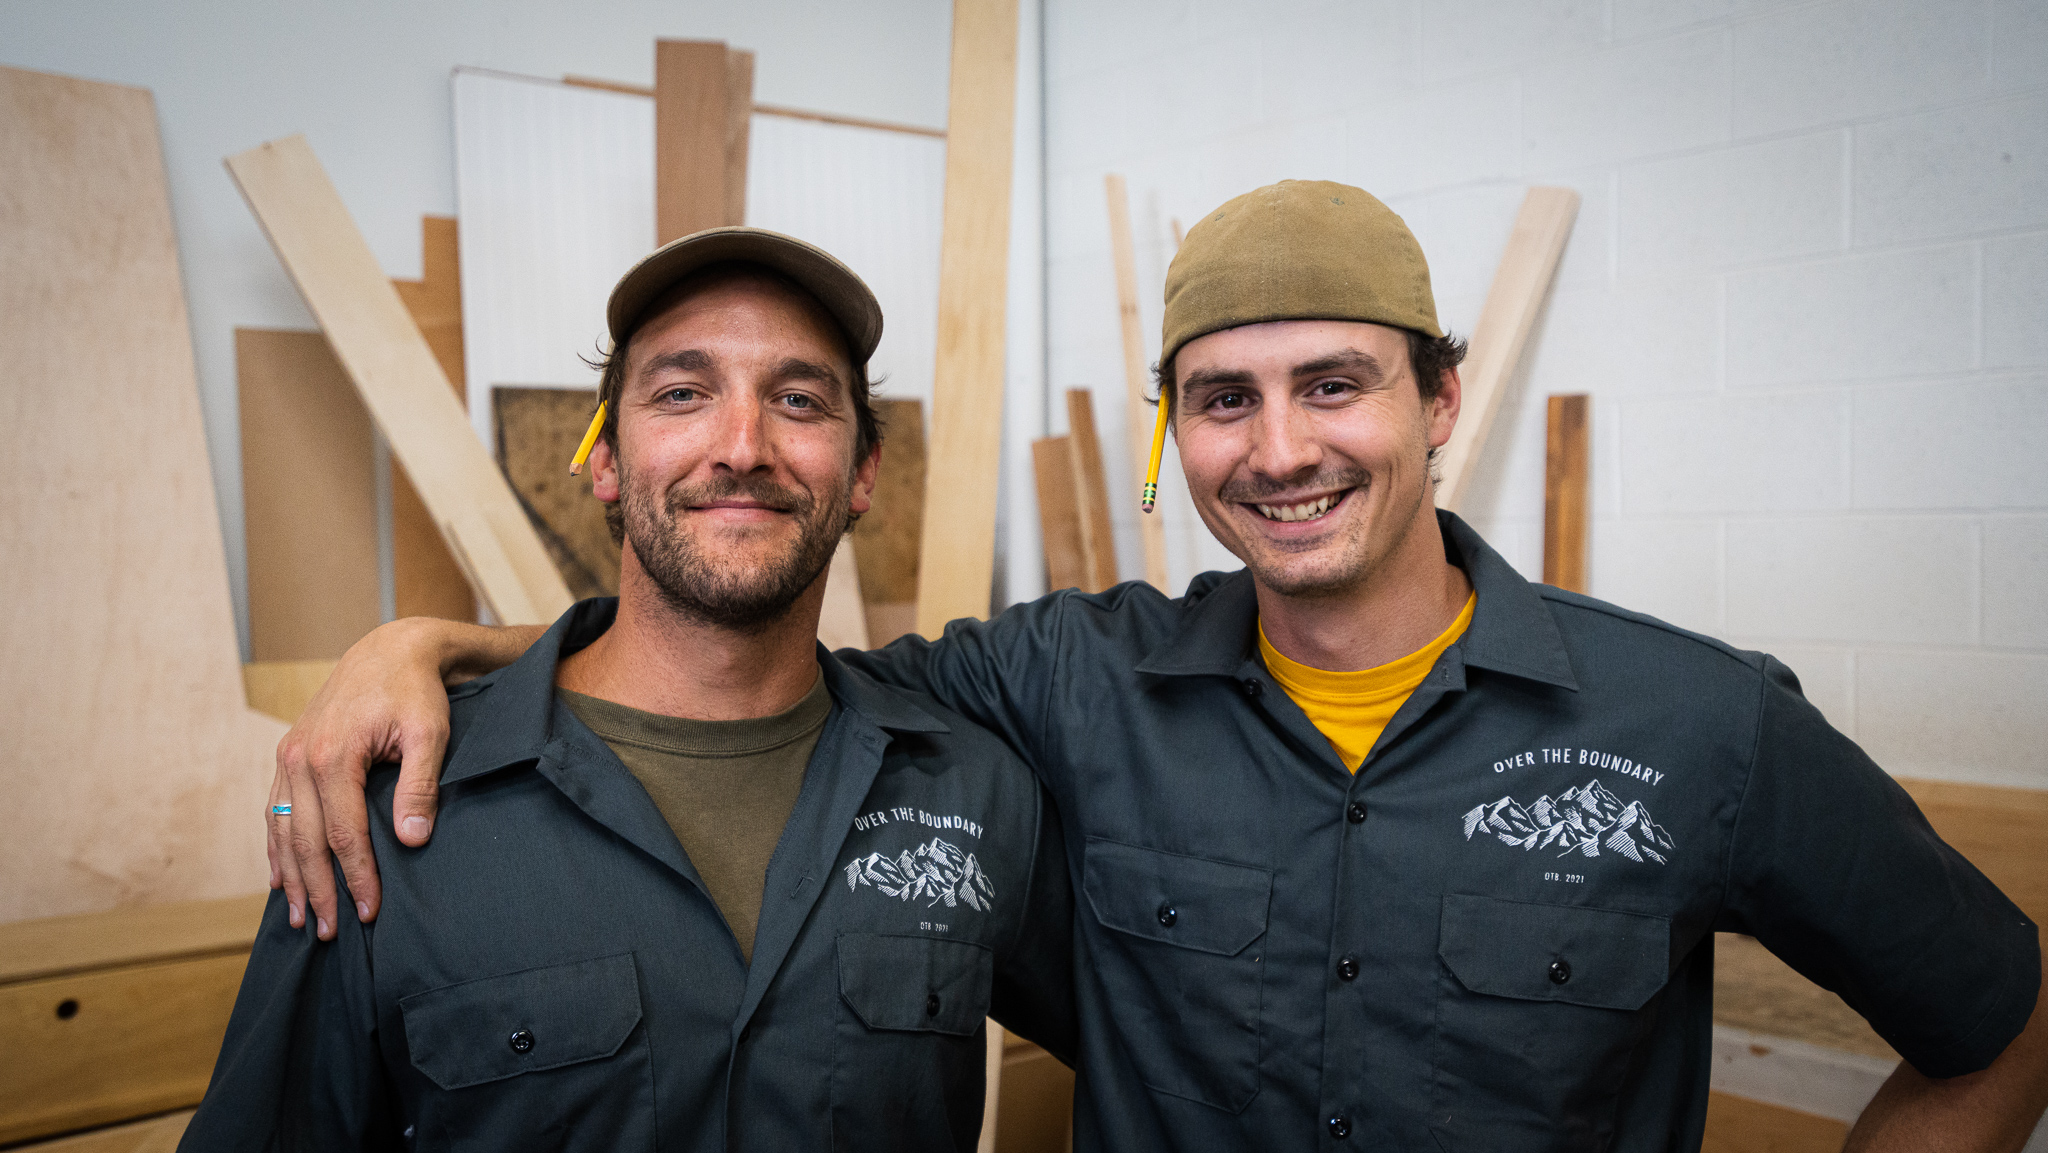 A picture of of Will and Buzz, the co-owners of OTB Fabrication, with their arms around each other smiling for the camera. They're both wearing OTB Fabrication shop shirts, and wood can be seen stacked in the background.